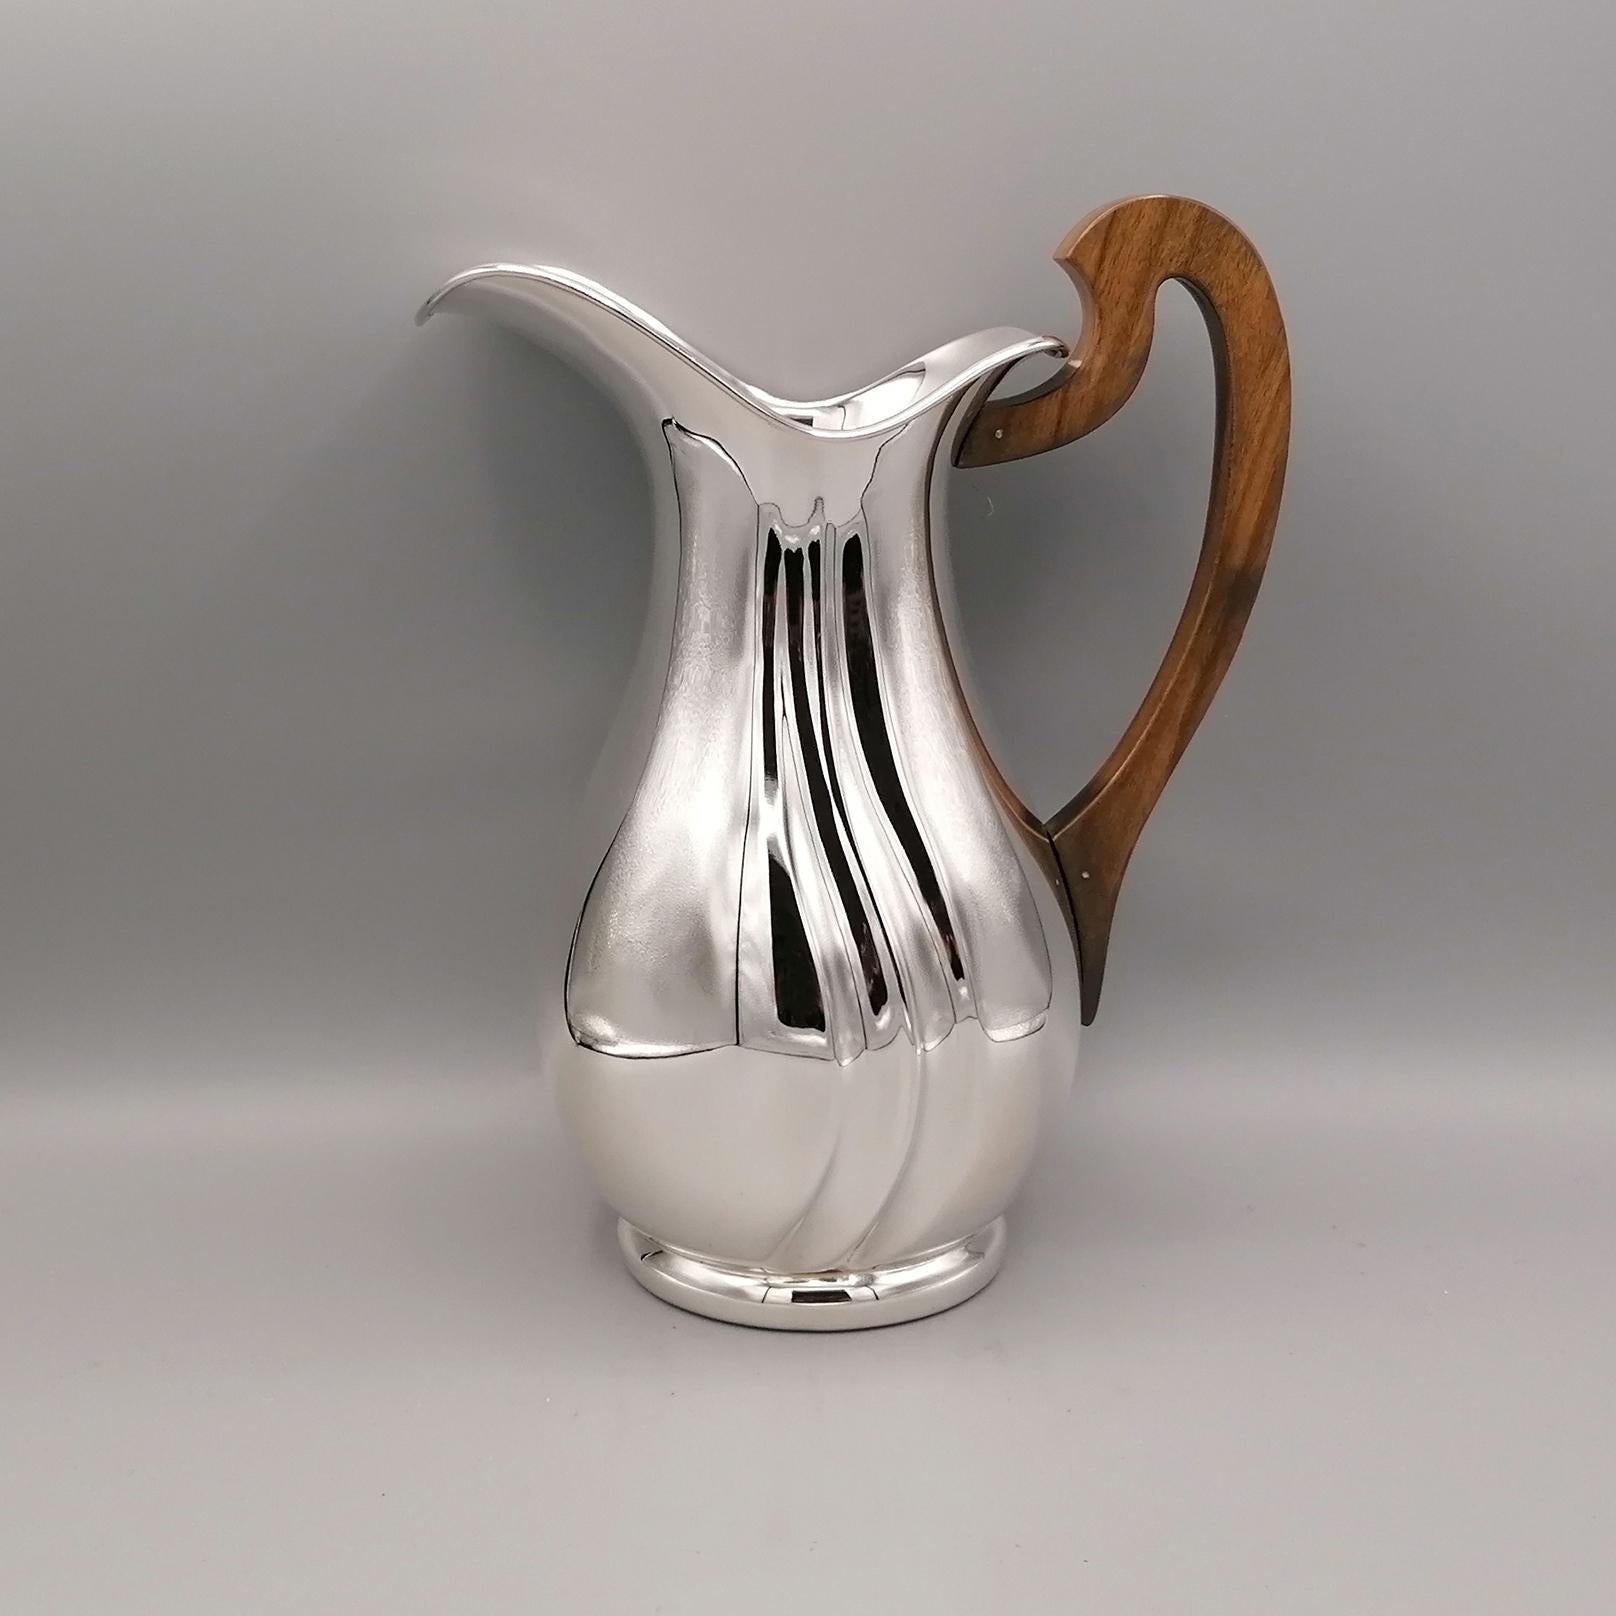 Completely handmade sterling silver water jug.
The body is completely smooth with two torchon grooves which make the object very bright and elegant.
The pourer is large and concave, to allow a precise flow of water.
The handle, designed for a